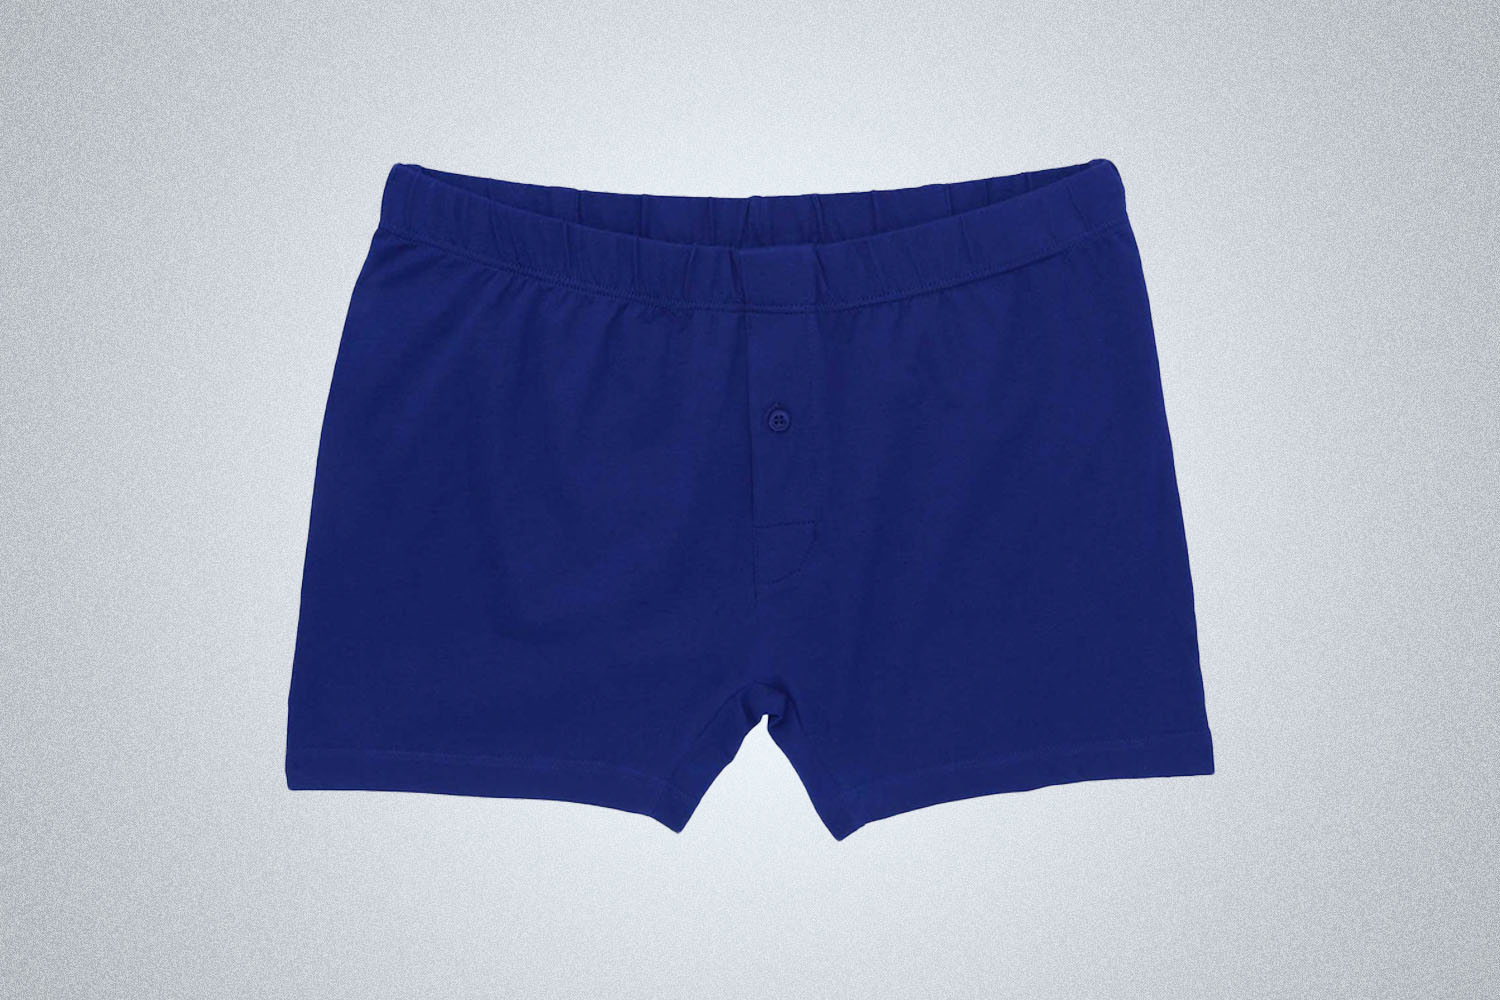 a pair of blue trunks on a grey background